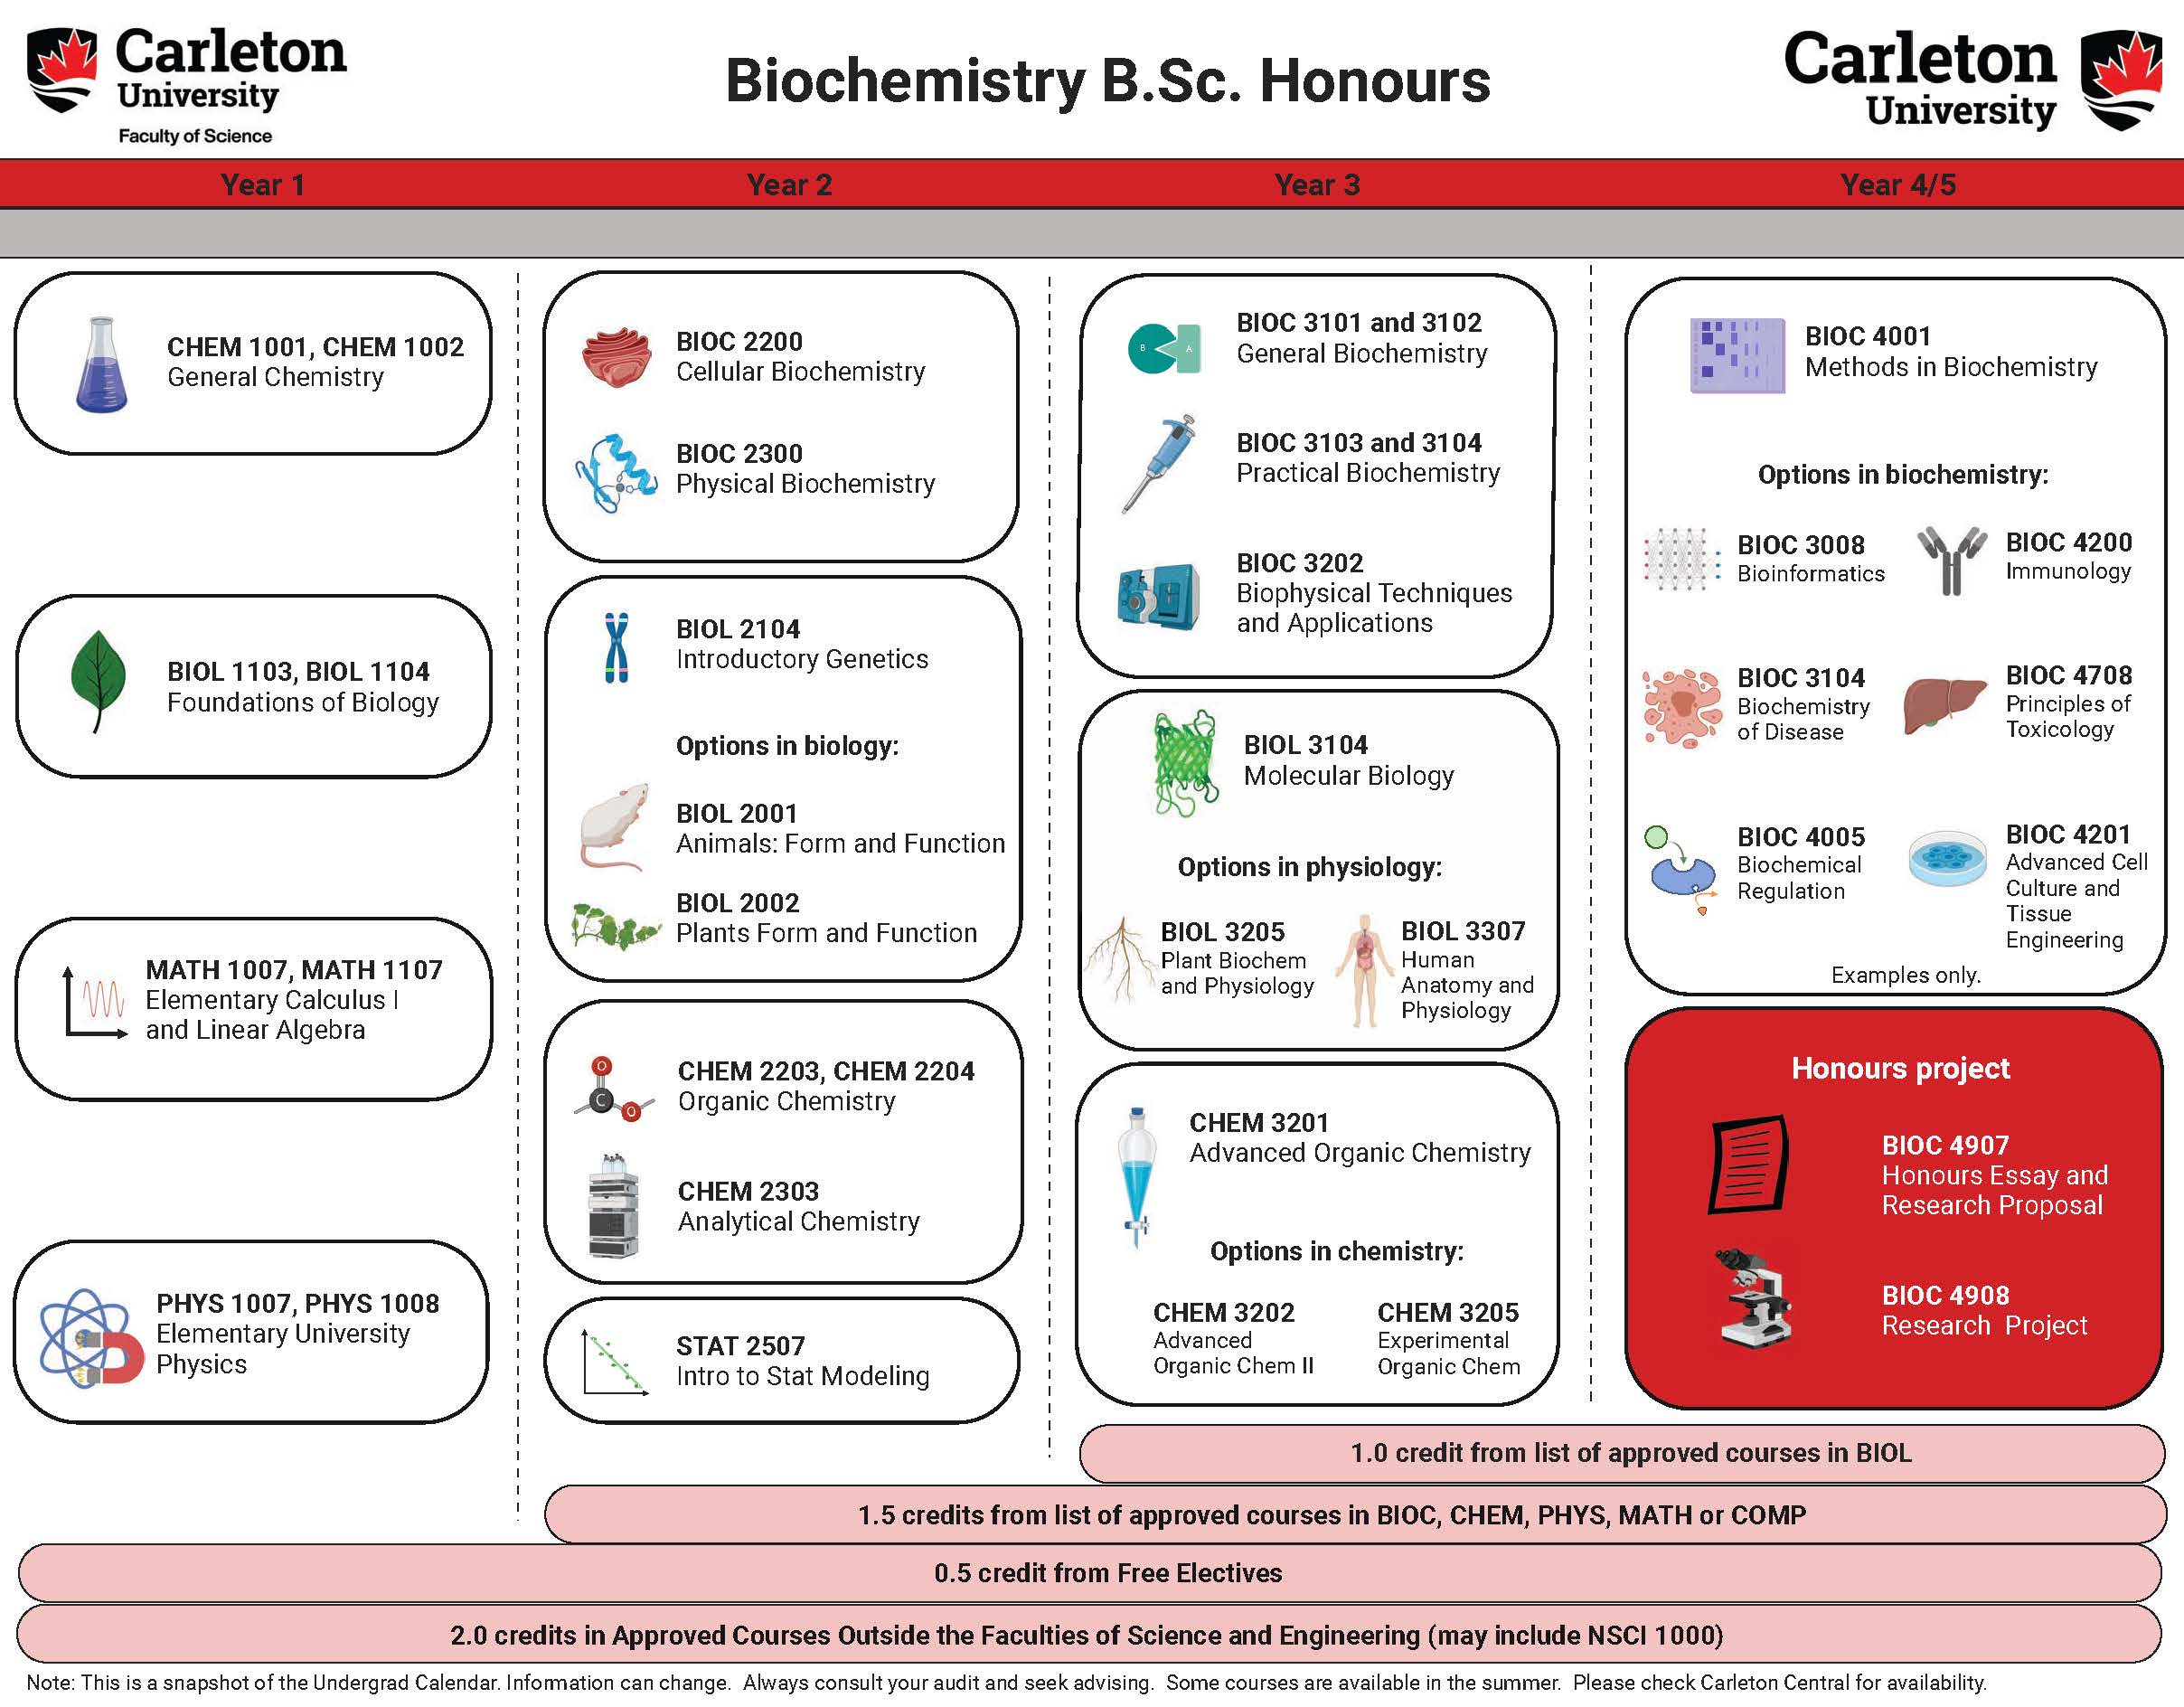 Course Map for Biochemistry BSc. Honours.